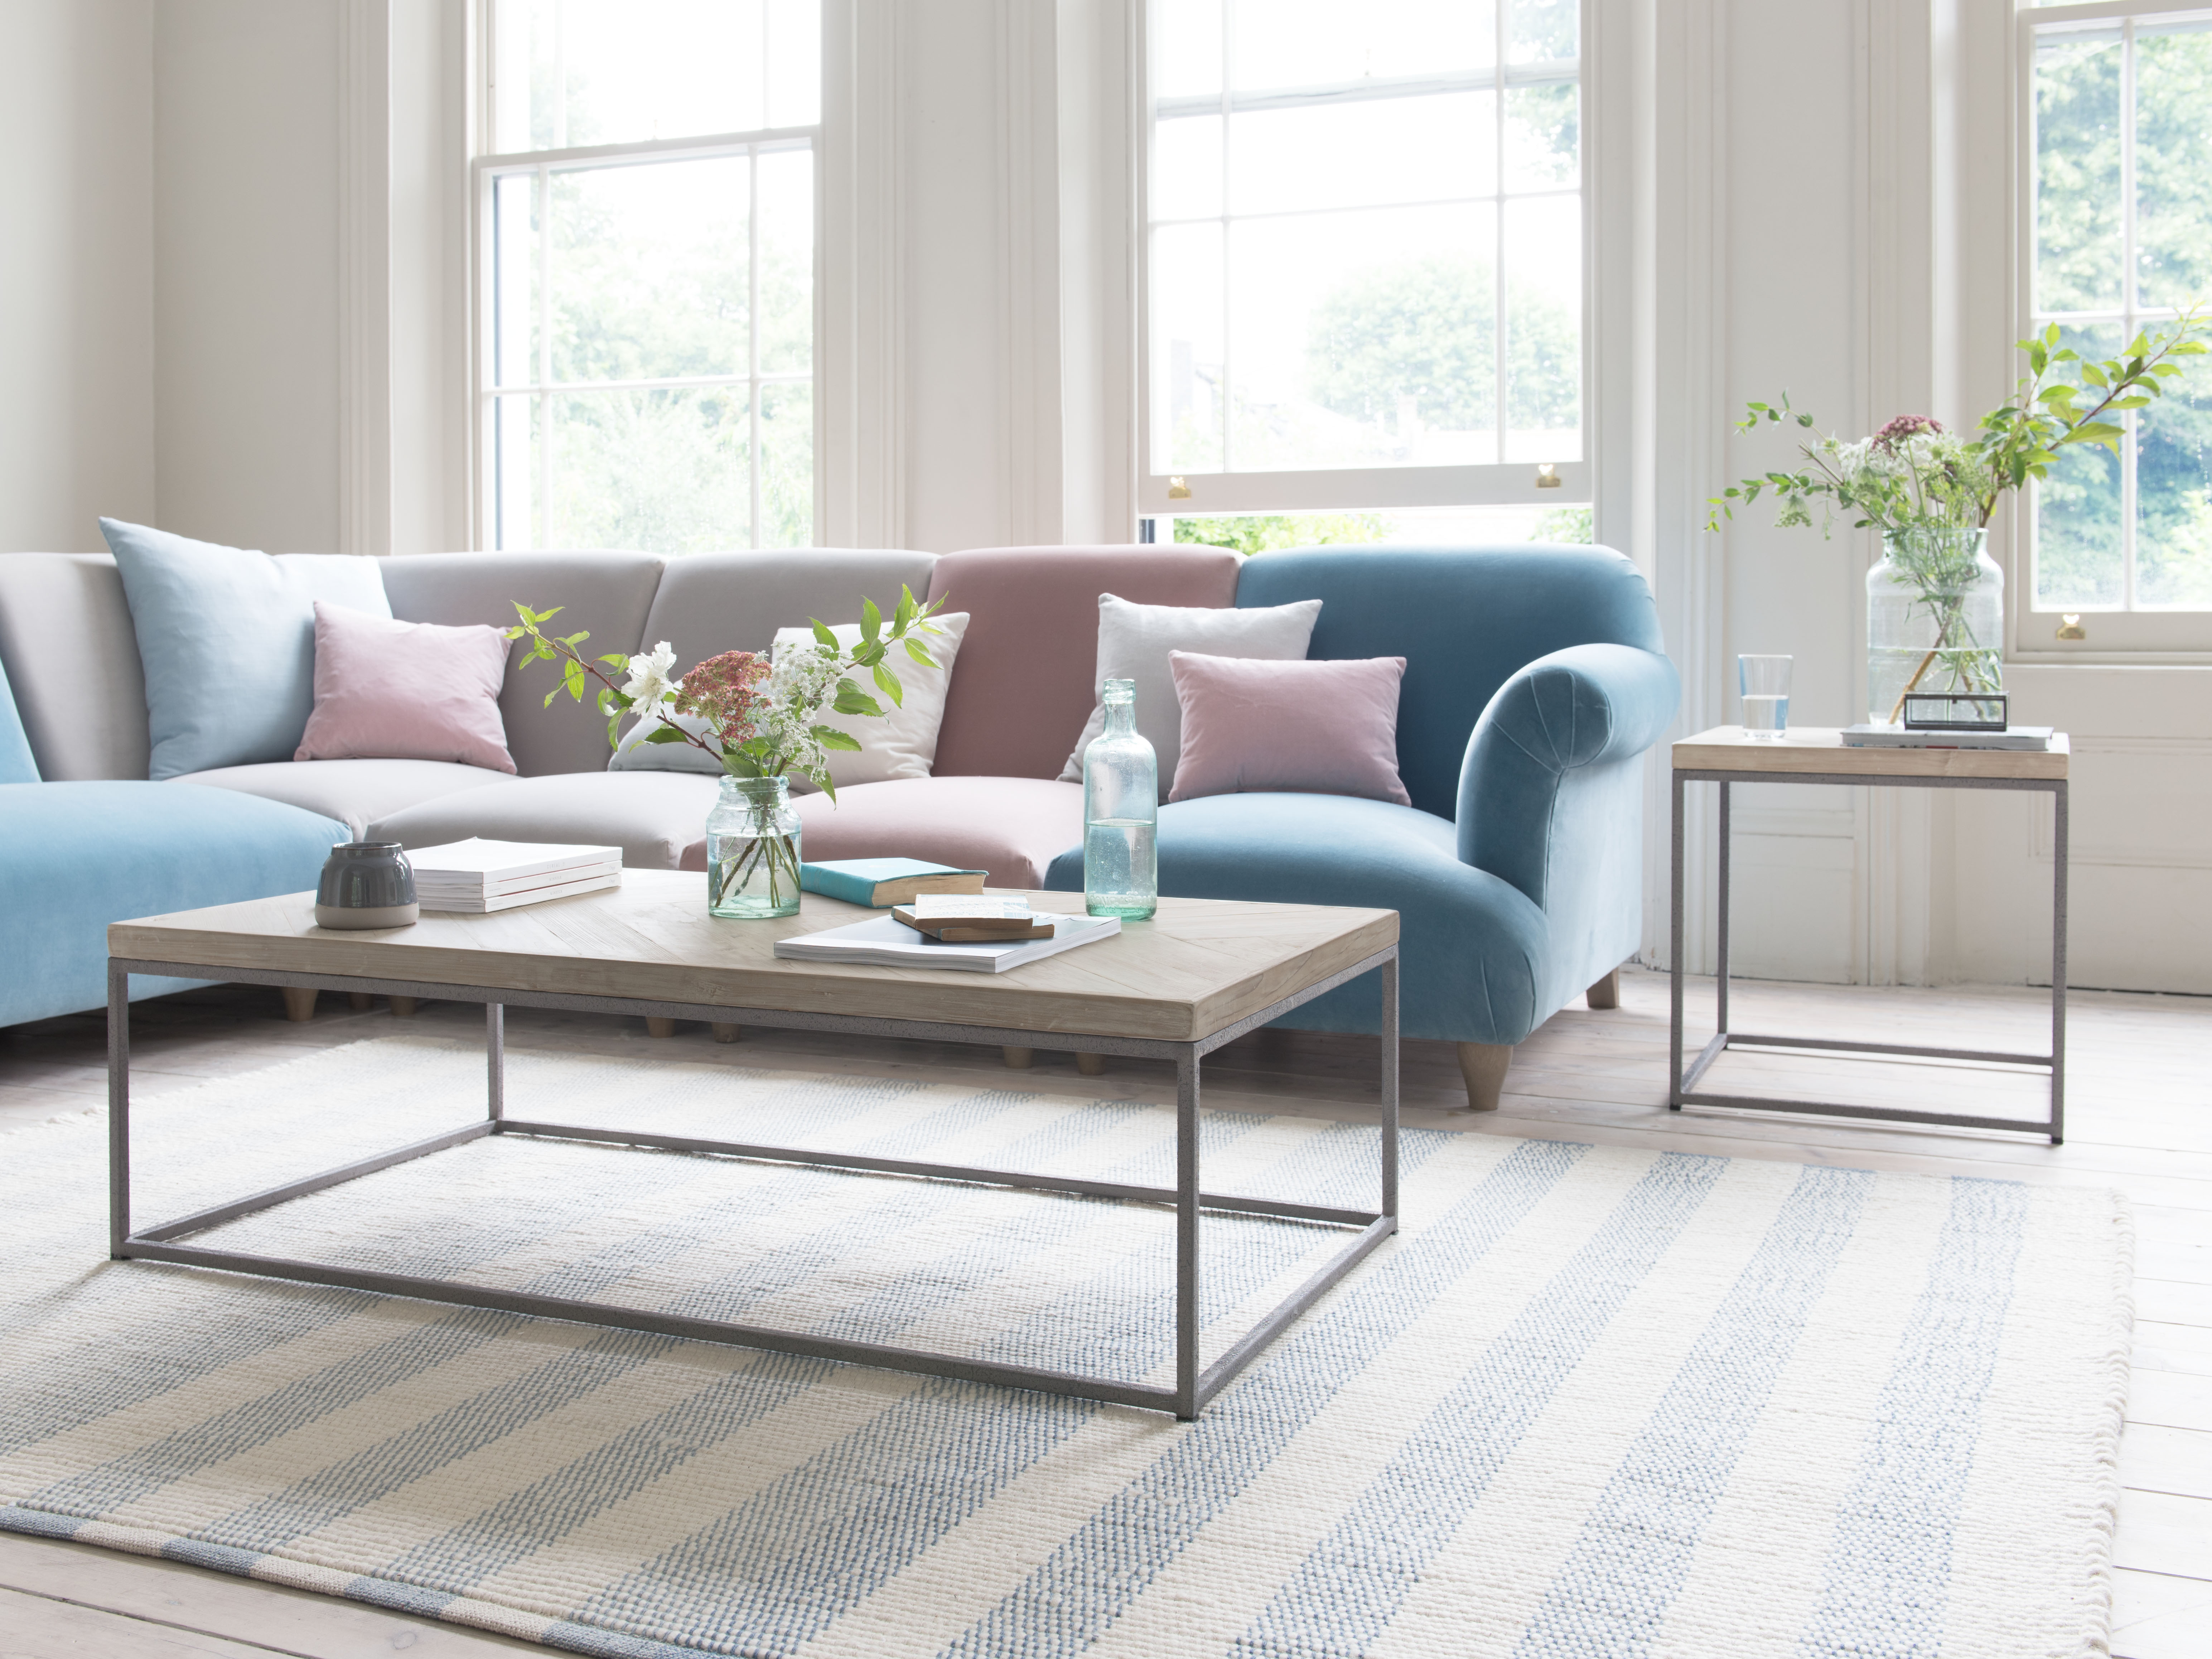 Living room rug ideas and tips: How to choose the right one - Curbed